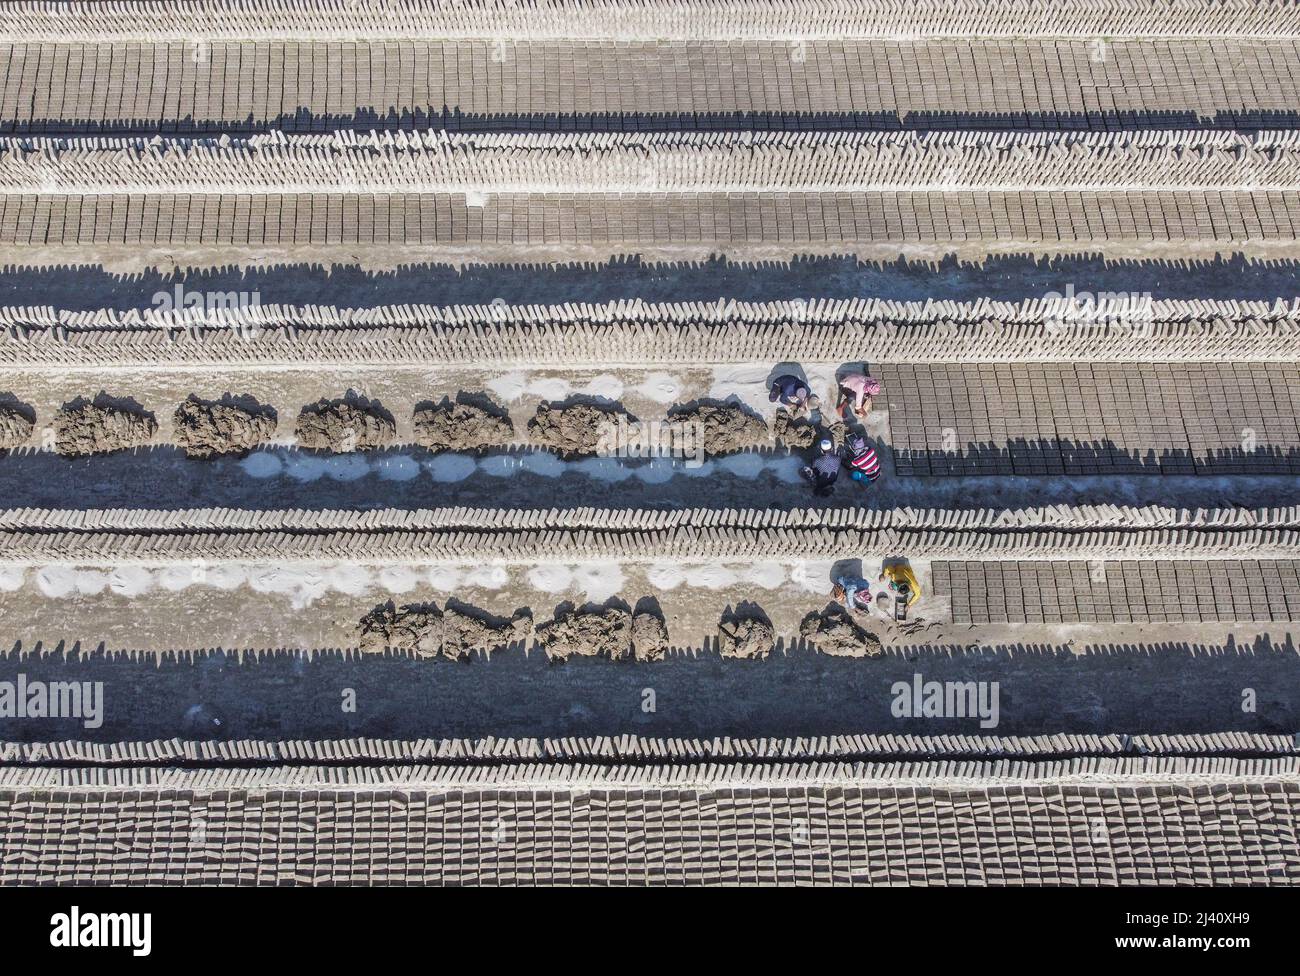 Dhaka, Dhaka, Bangladesh. 11th Apr, 2022. Workers are surrounded by  millions of newly-created bricks at a factory. The staggering amount of  bricks were lain in long rows which stretch as far as